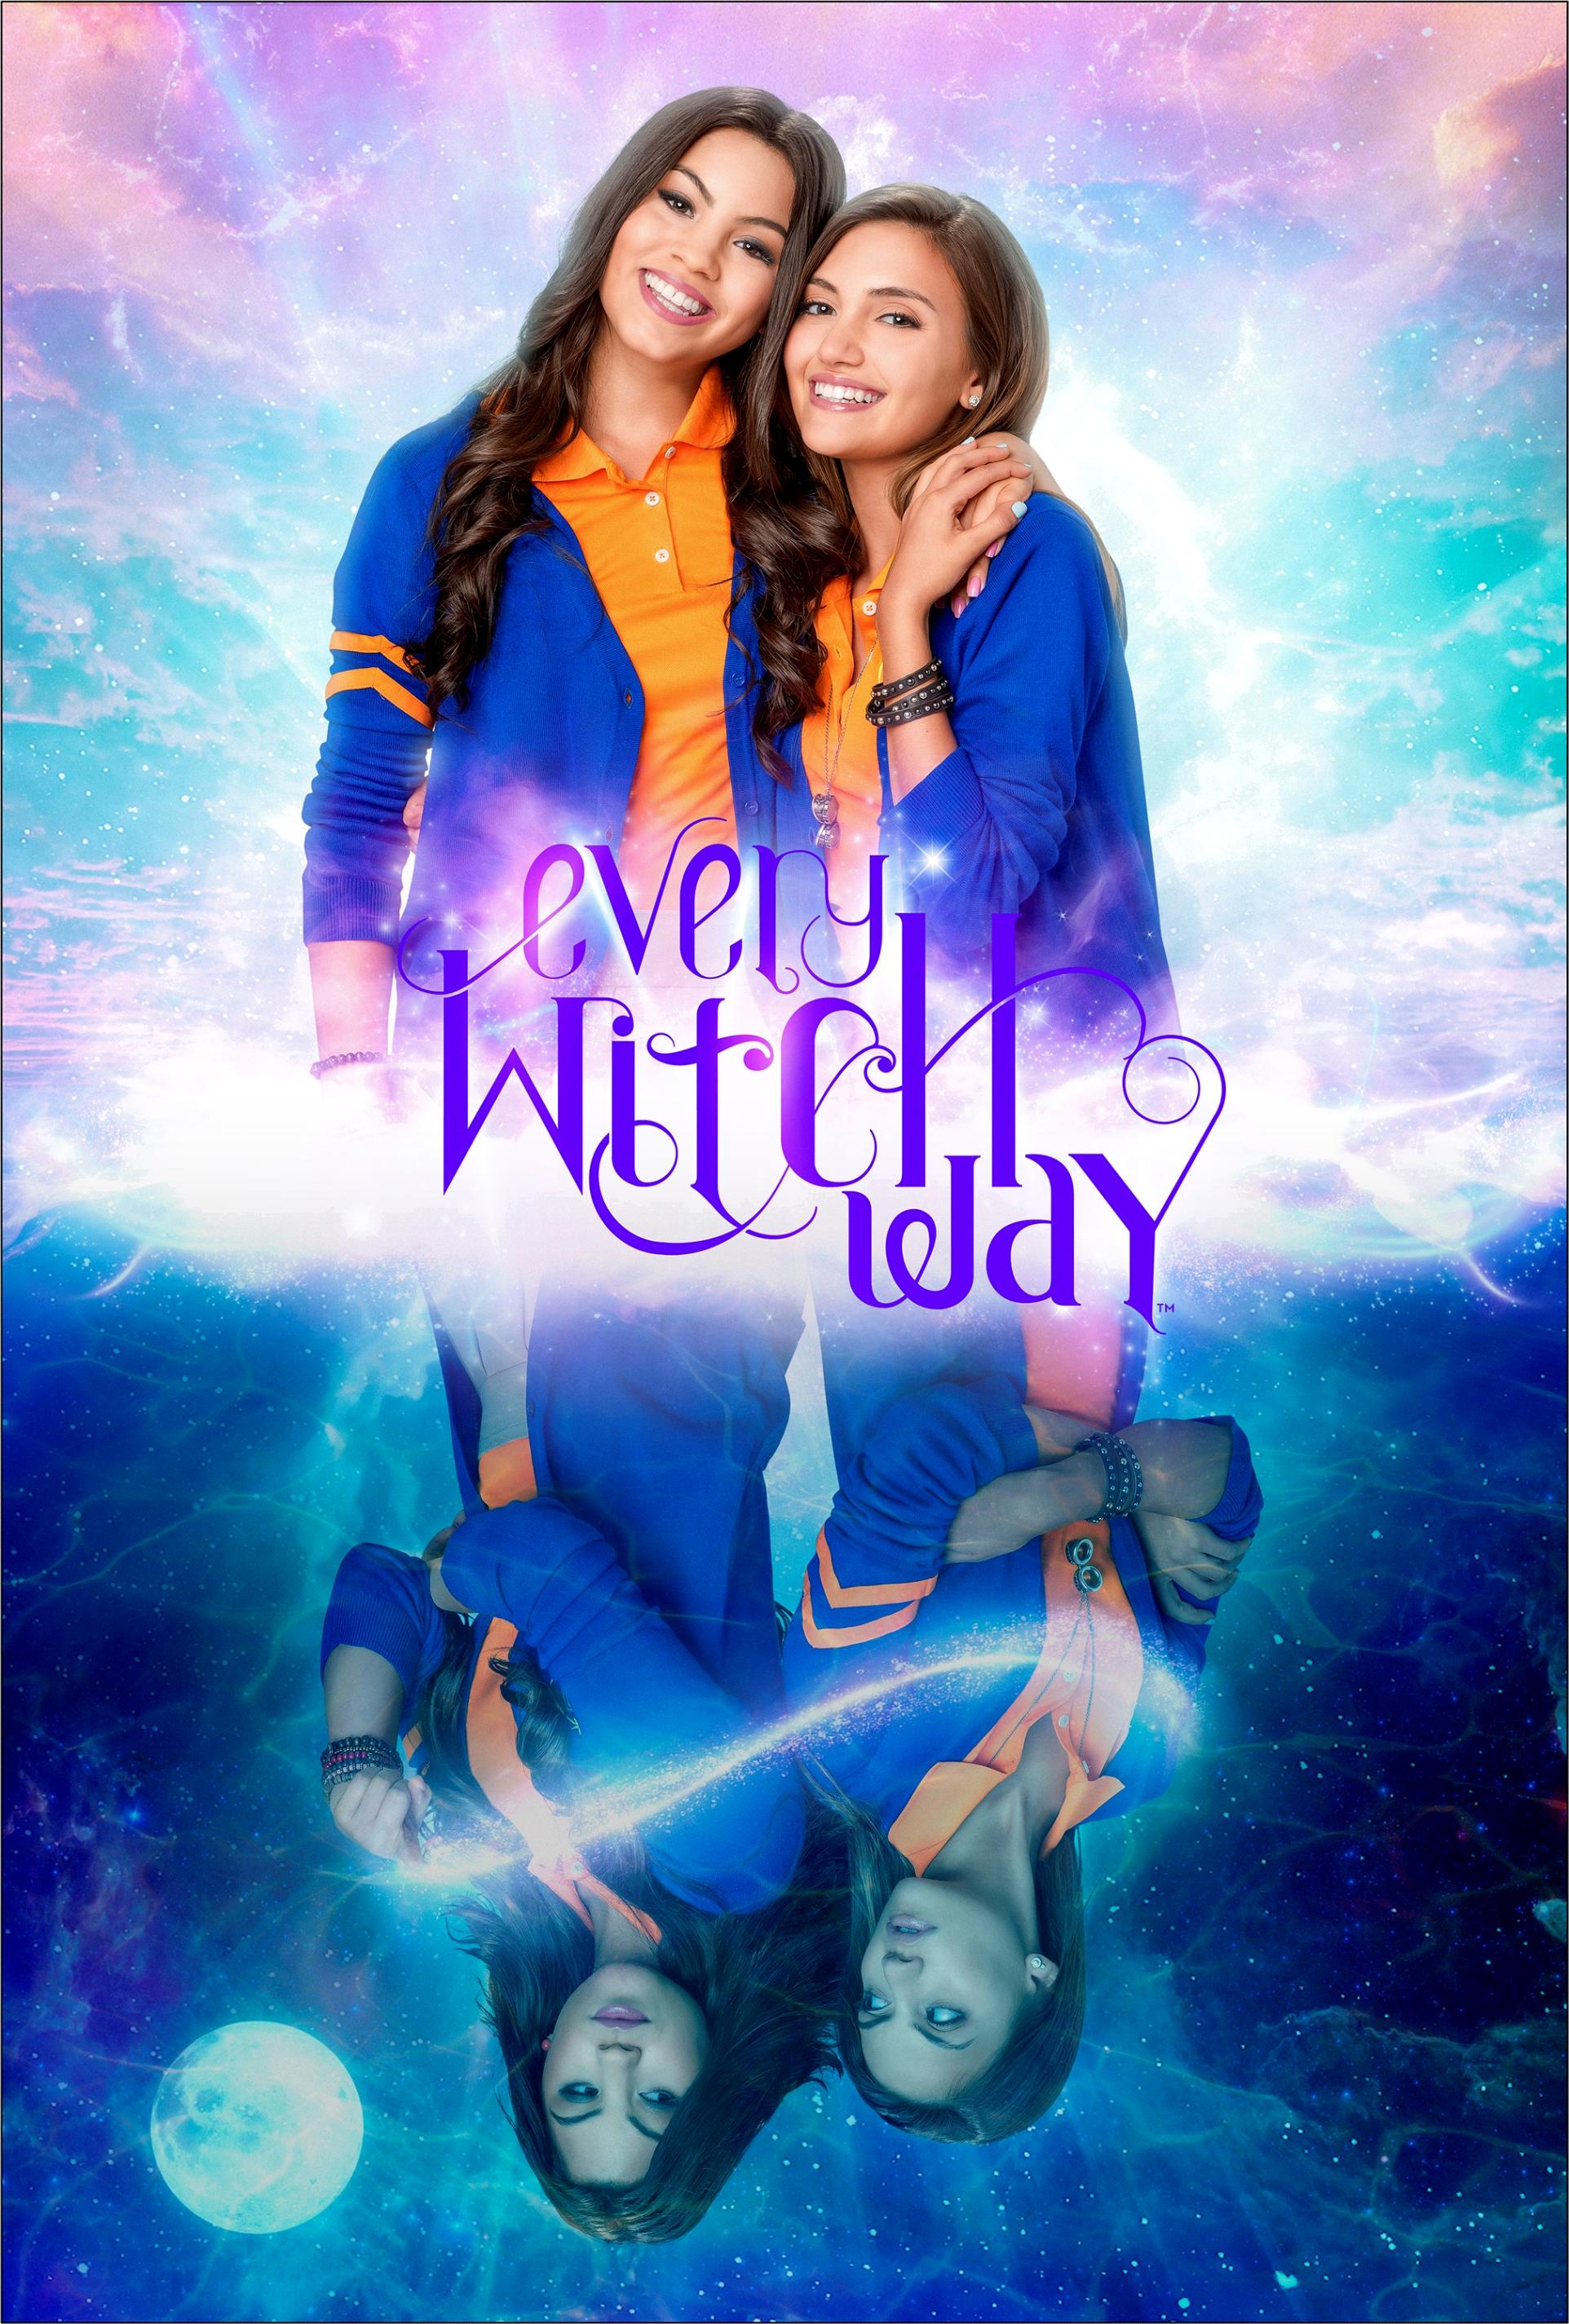 where can i watch every witch way